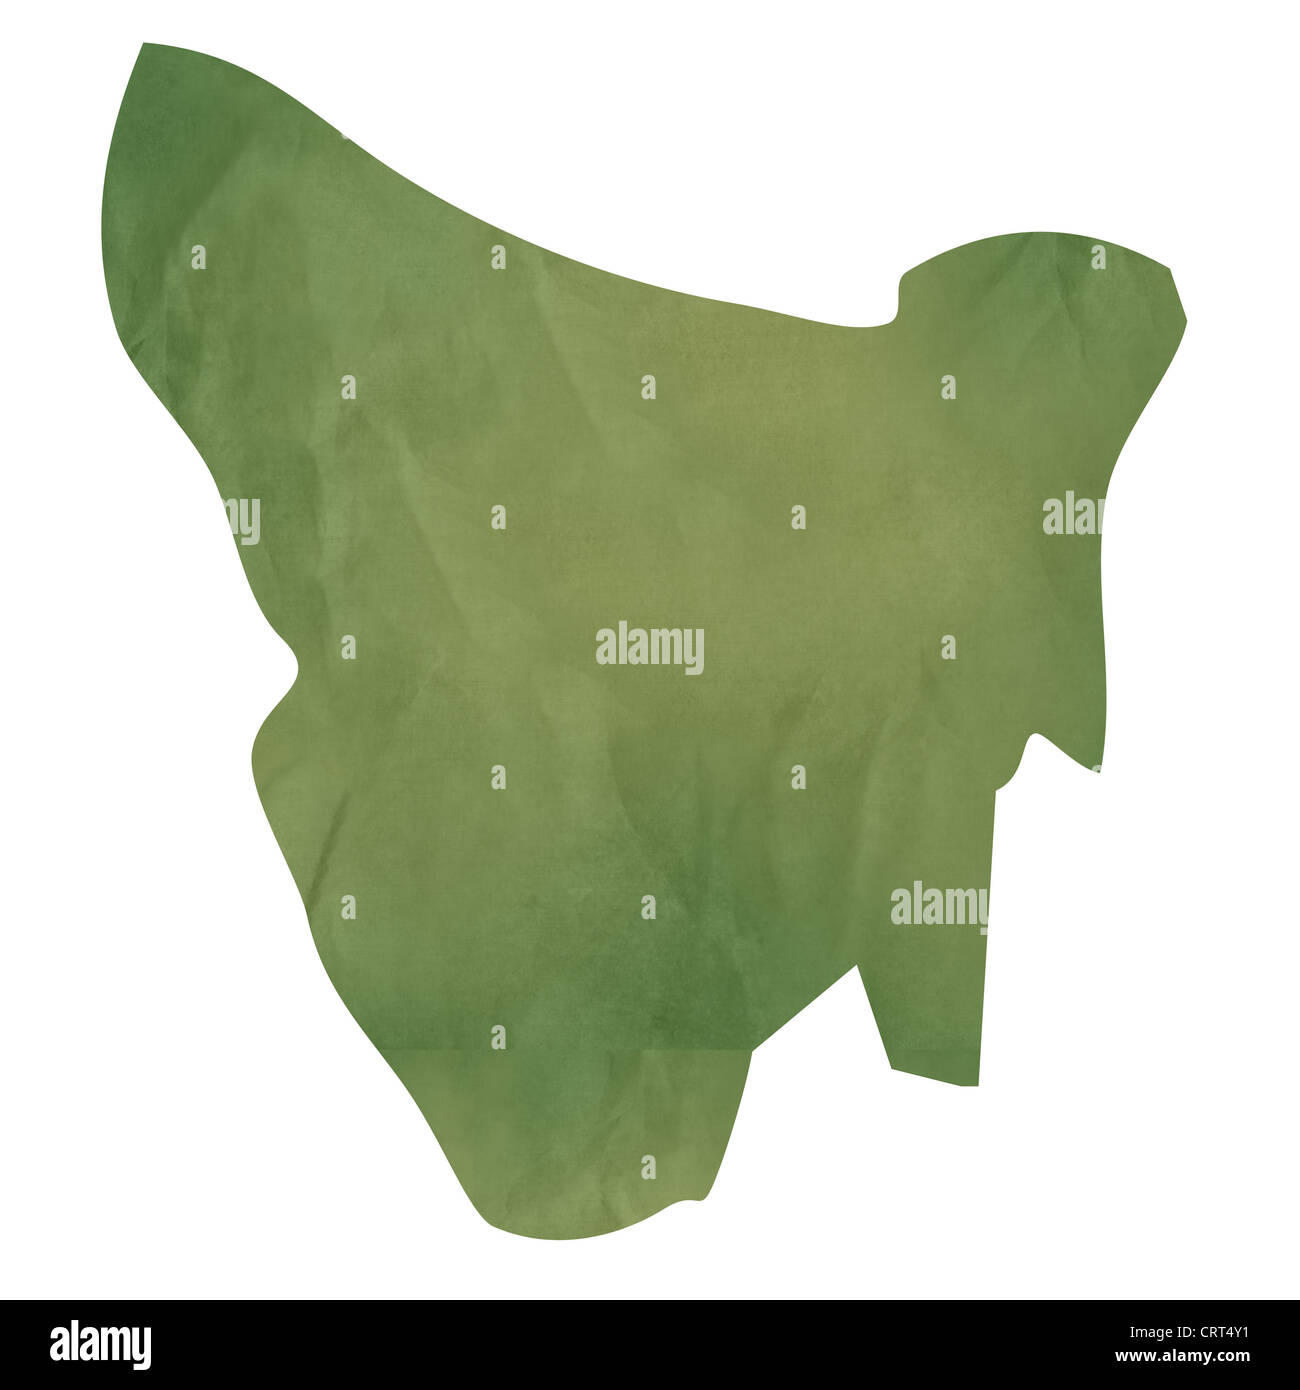 Tasmania map in old green paper isolated on white background. Stock Photo